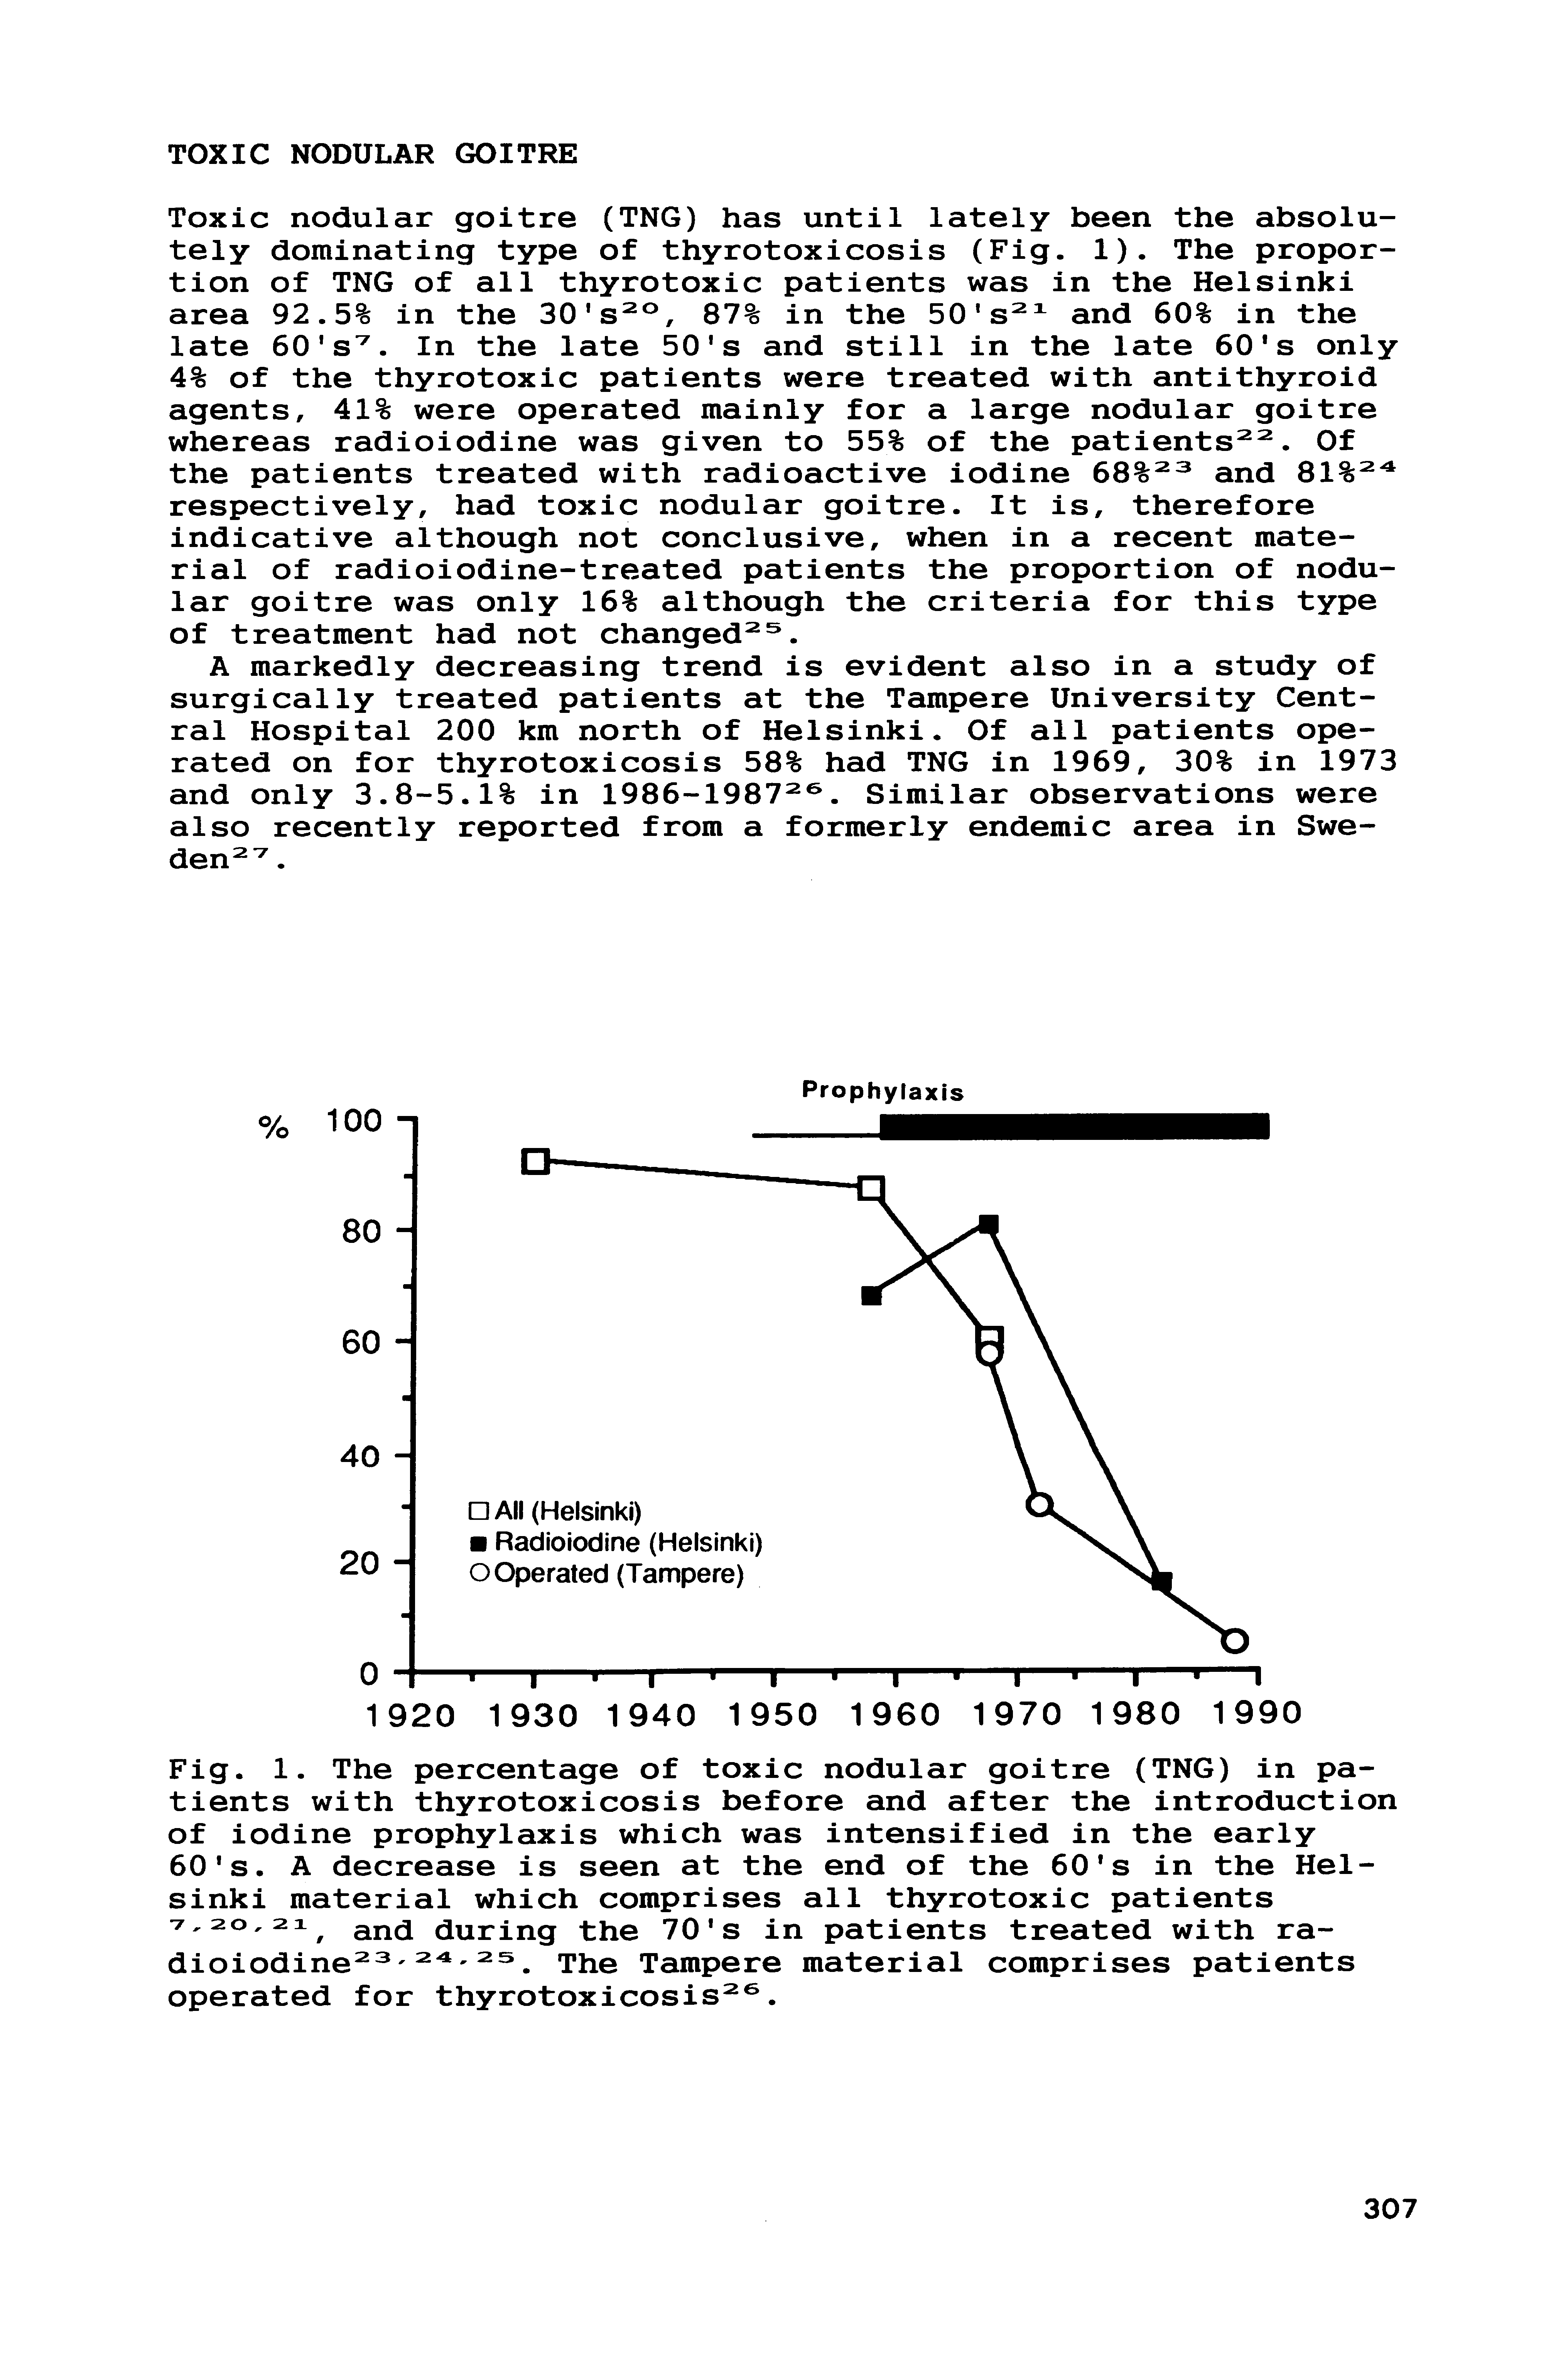 Fig. 1. The percentage of toxic nodular goitre (TNG) in patients with thyrotoxicosis before and after the introduction of iodine prophylaxis which was intensified in the early 60 s. A decrease is seen at the end of the 60 s in the Helsinki material which comprises all thyrotoxic patients 7,20,21 and during the 70 s in patients treated with ra-dioiodine The Tampere material comprises patients operated for thyrotoxicosis .